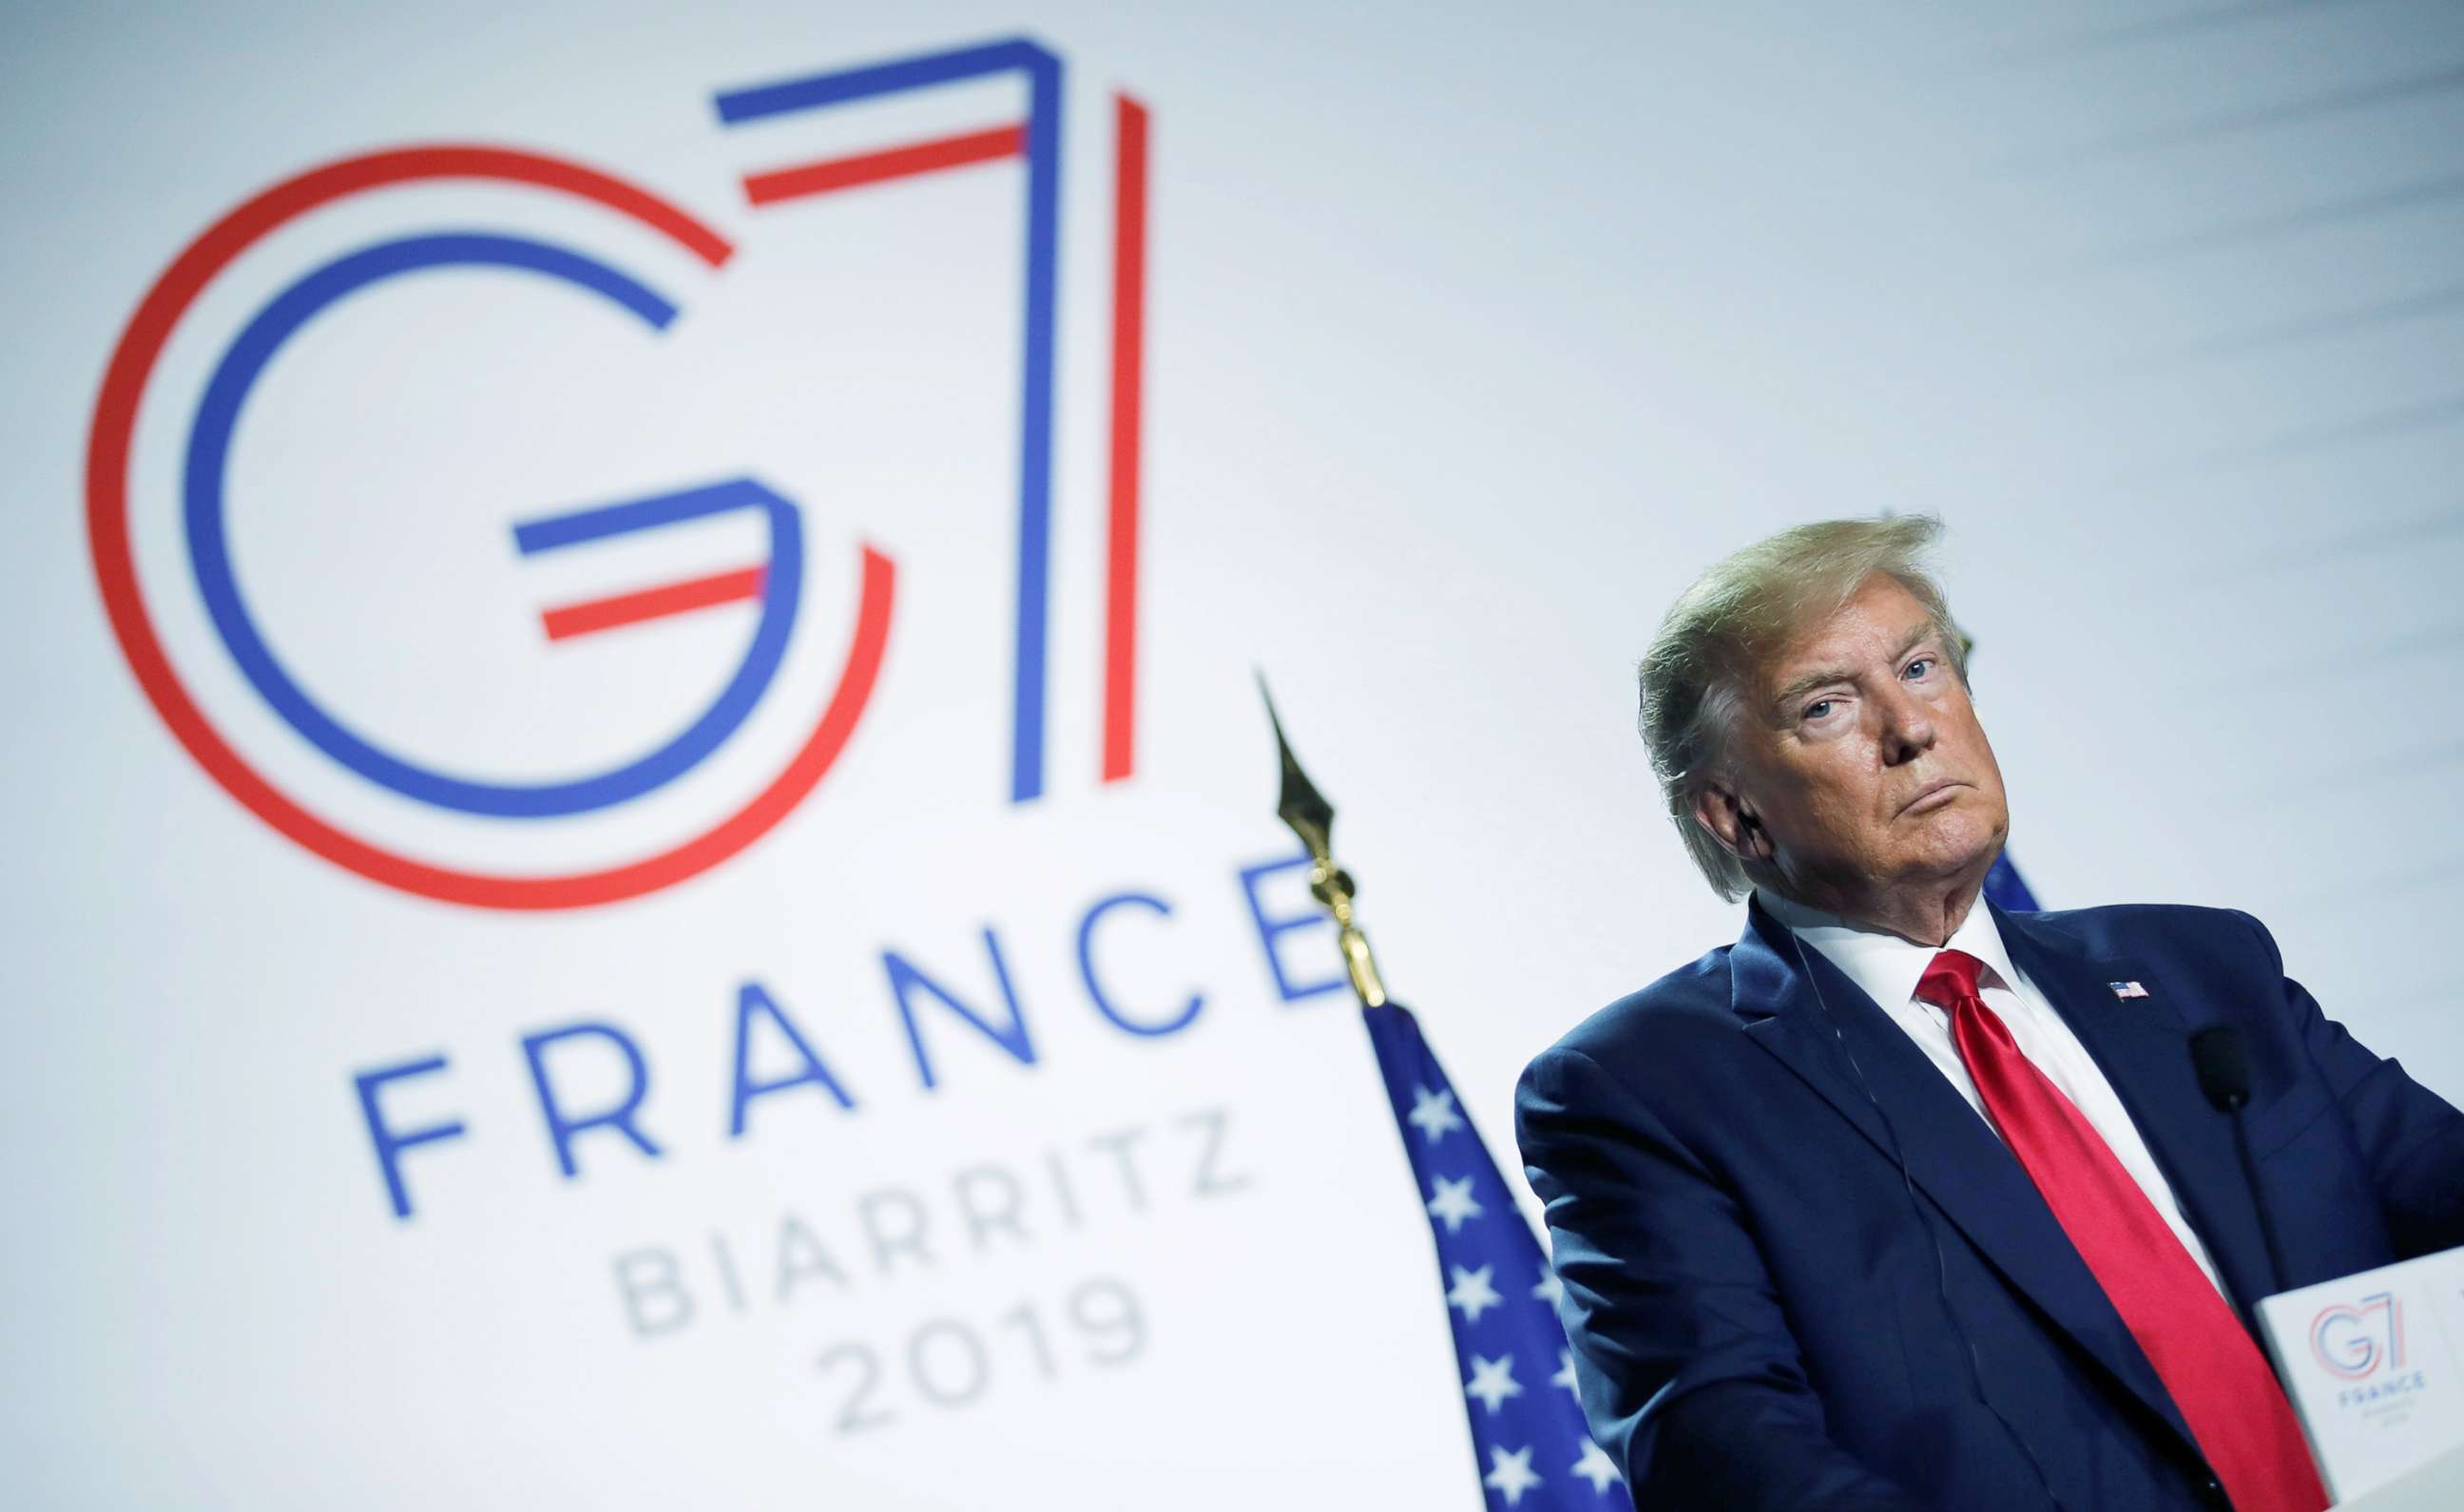 PHOTO: President Donald Trump looks on during a news conference at the end of the G7 summit in Biarritz, France, Aug. 26, 2019. 